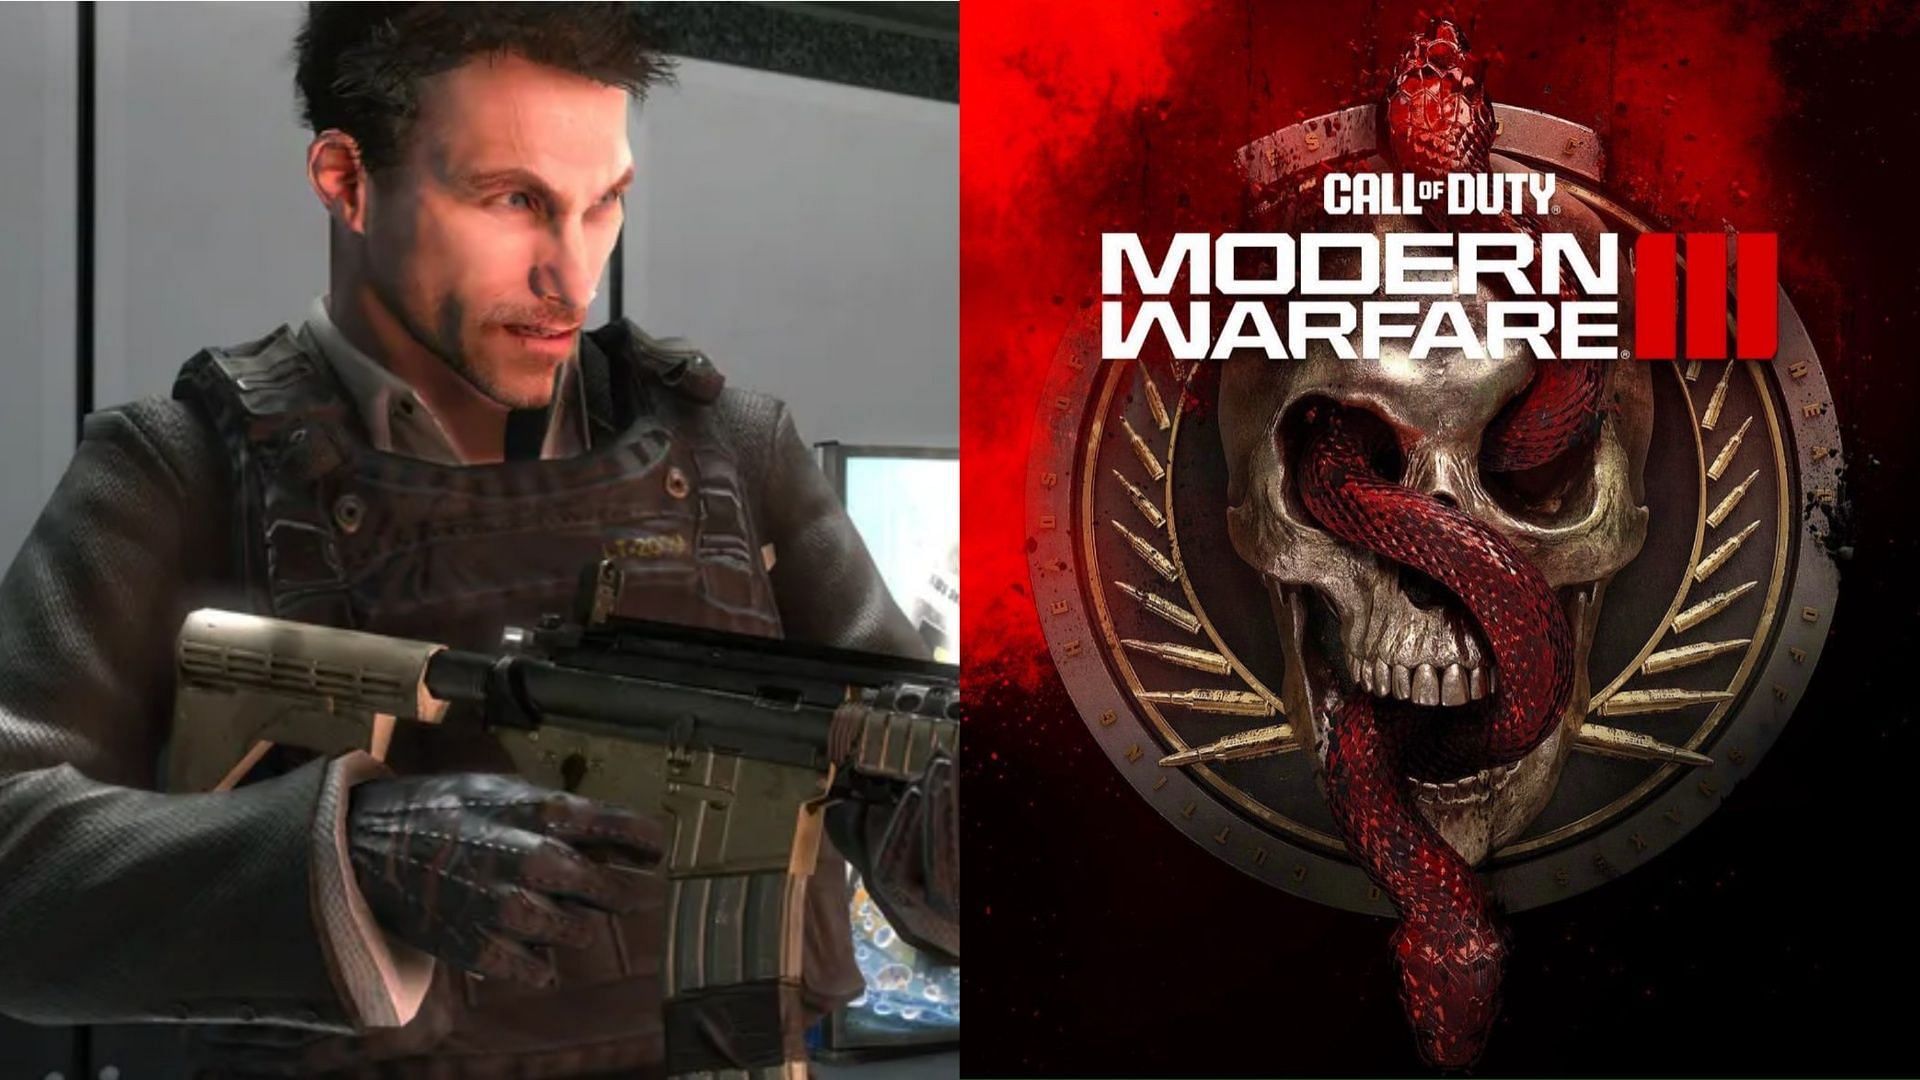 Makarov on the left and Modern Warfare 3 logo on the right.